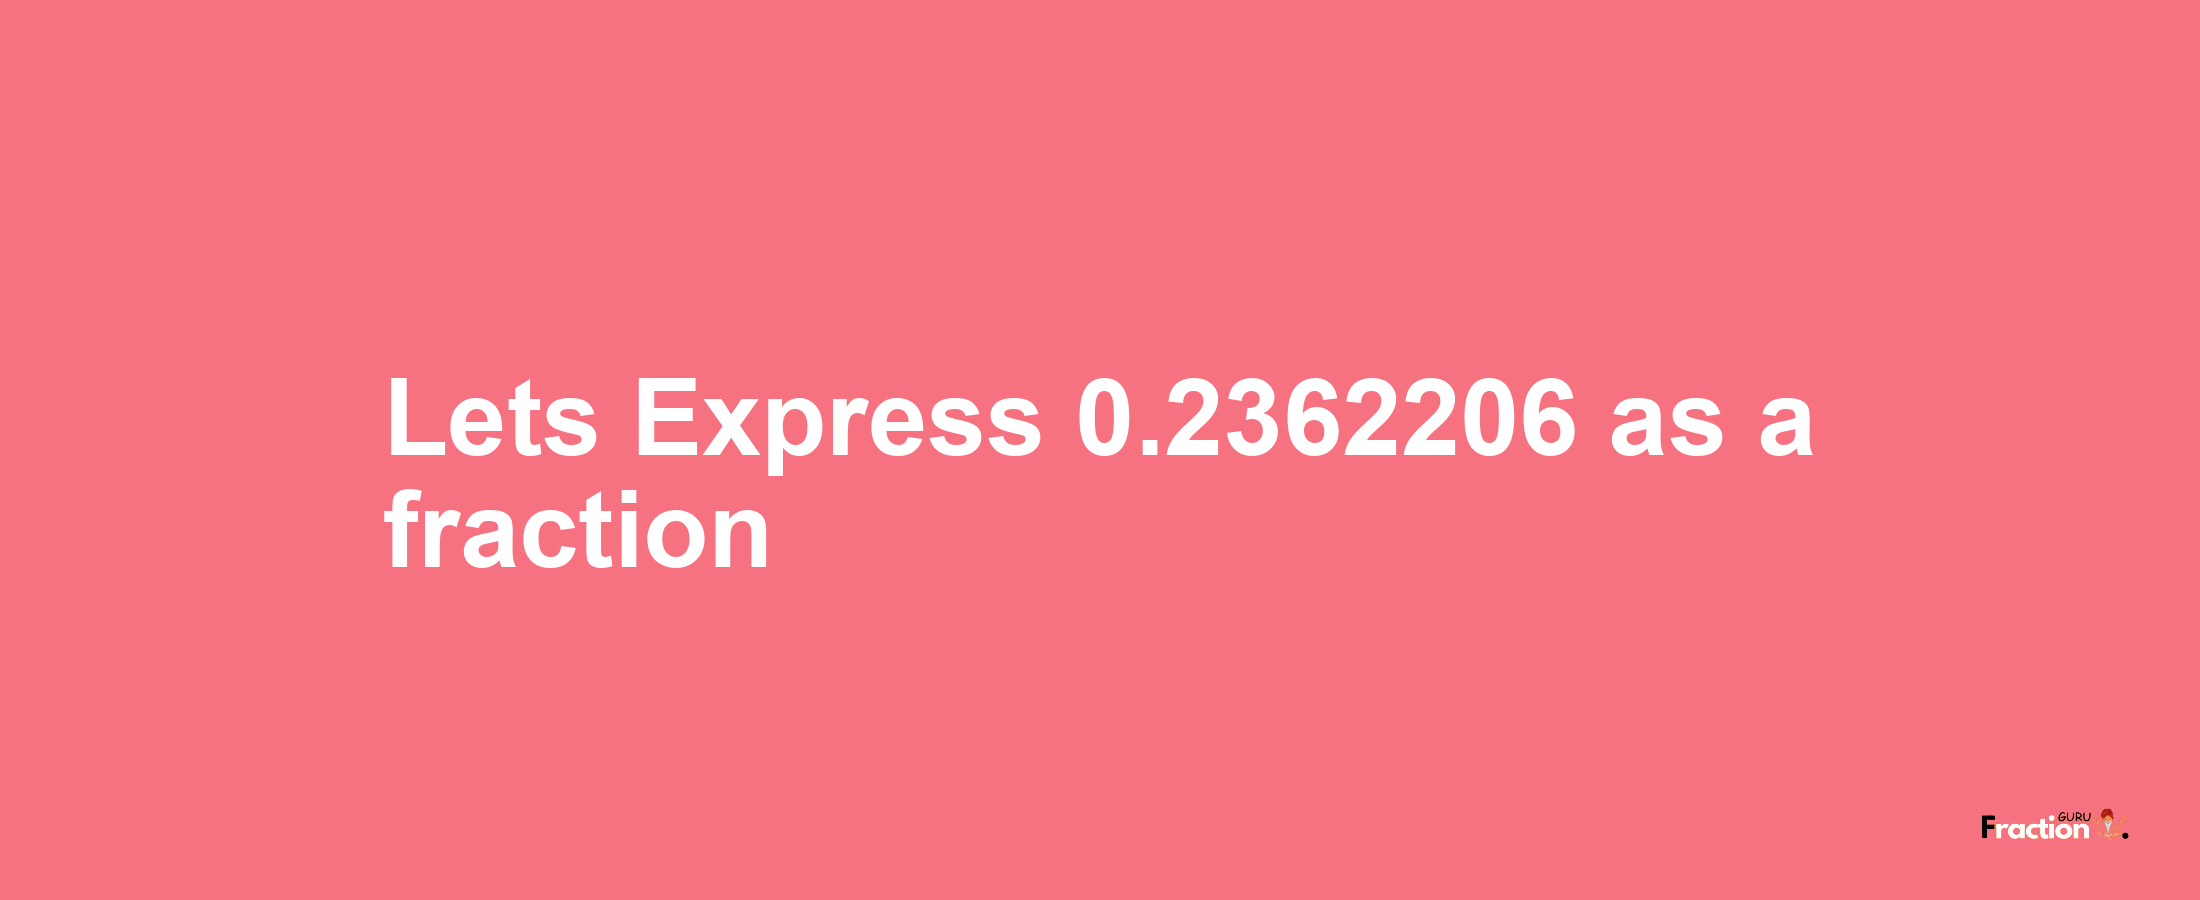 Lets Express 0.2362206 as afraction